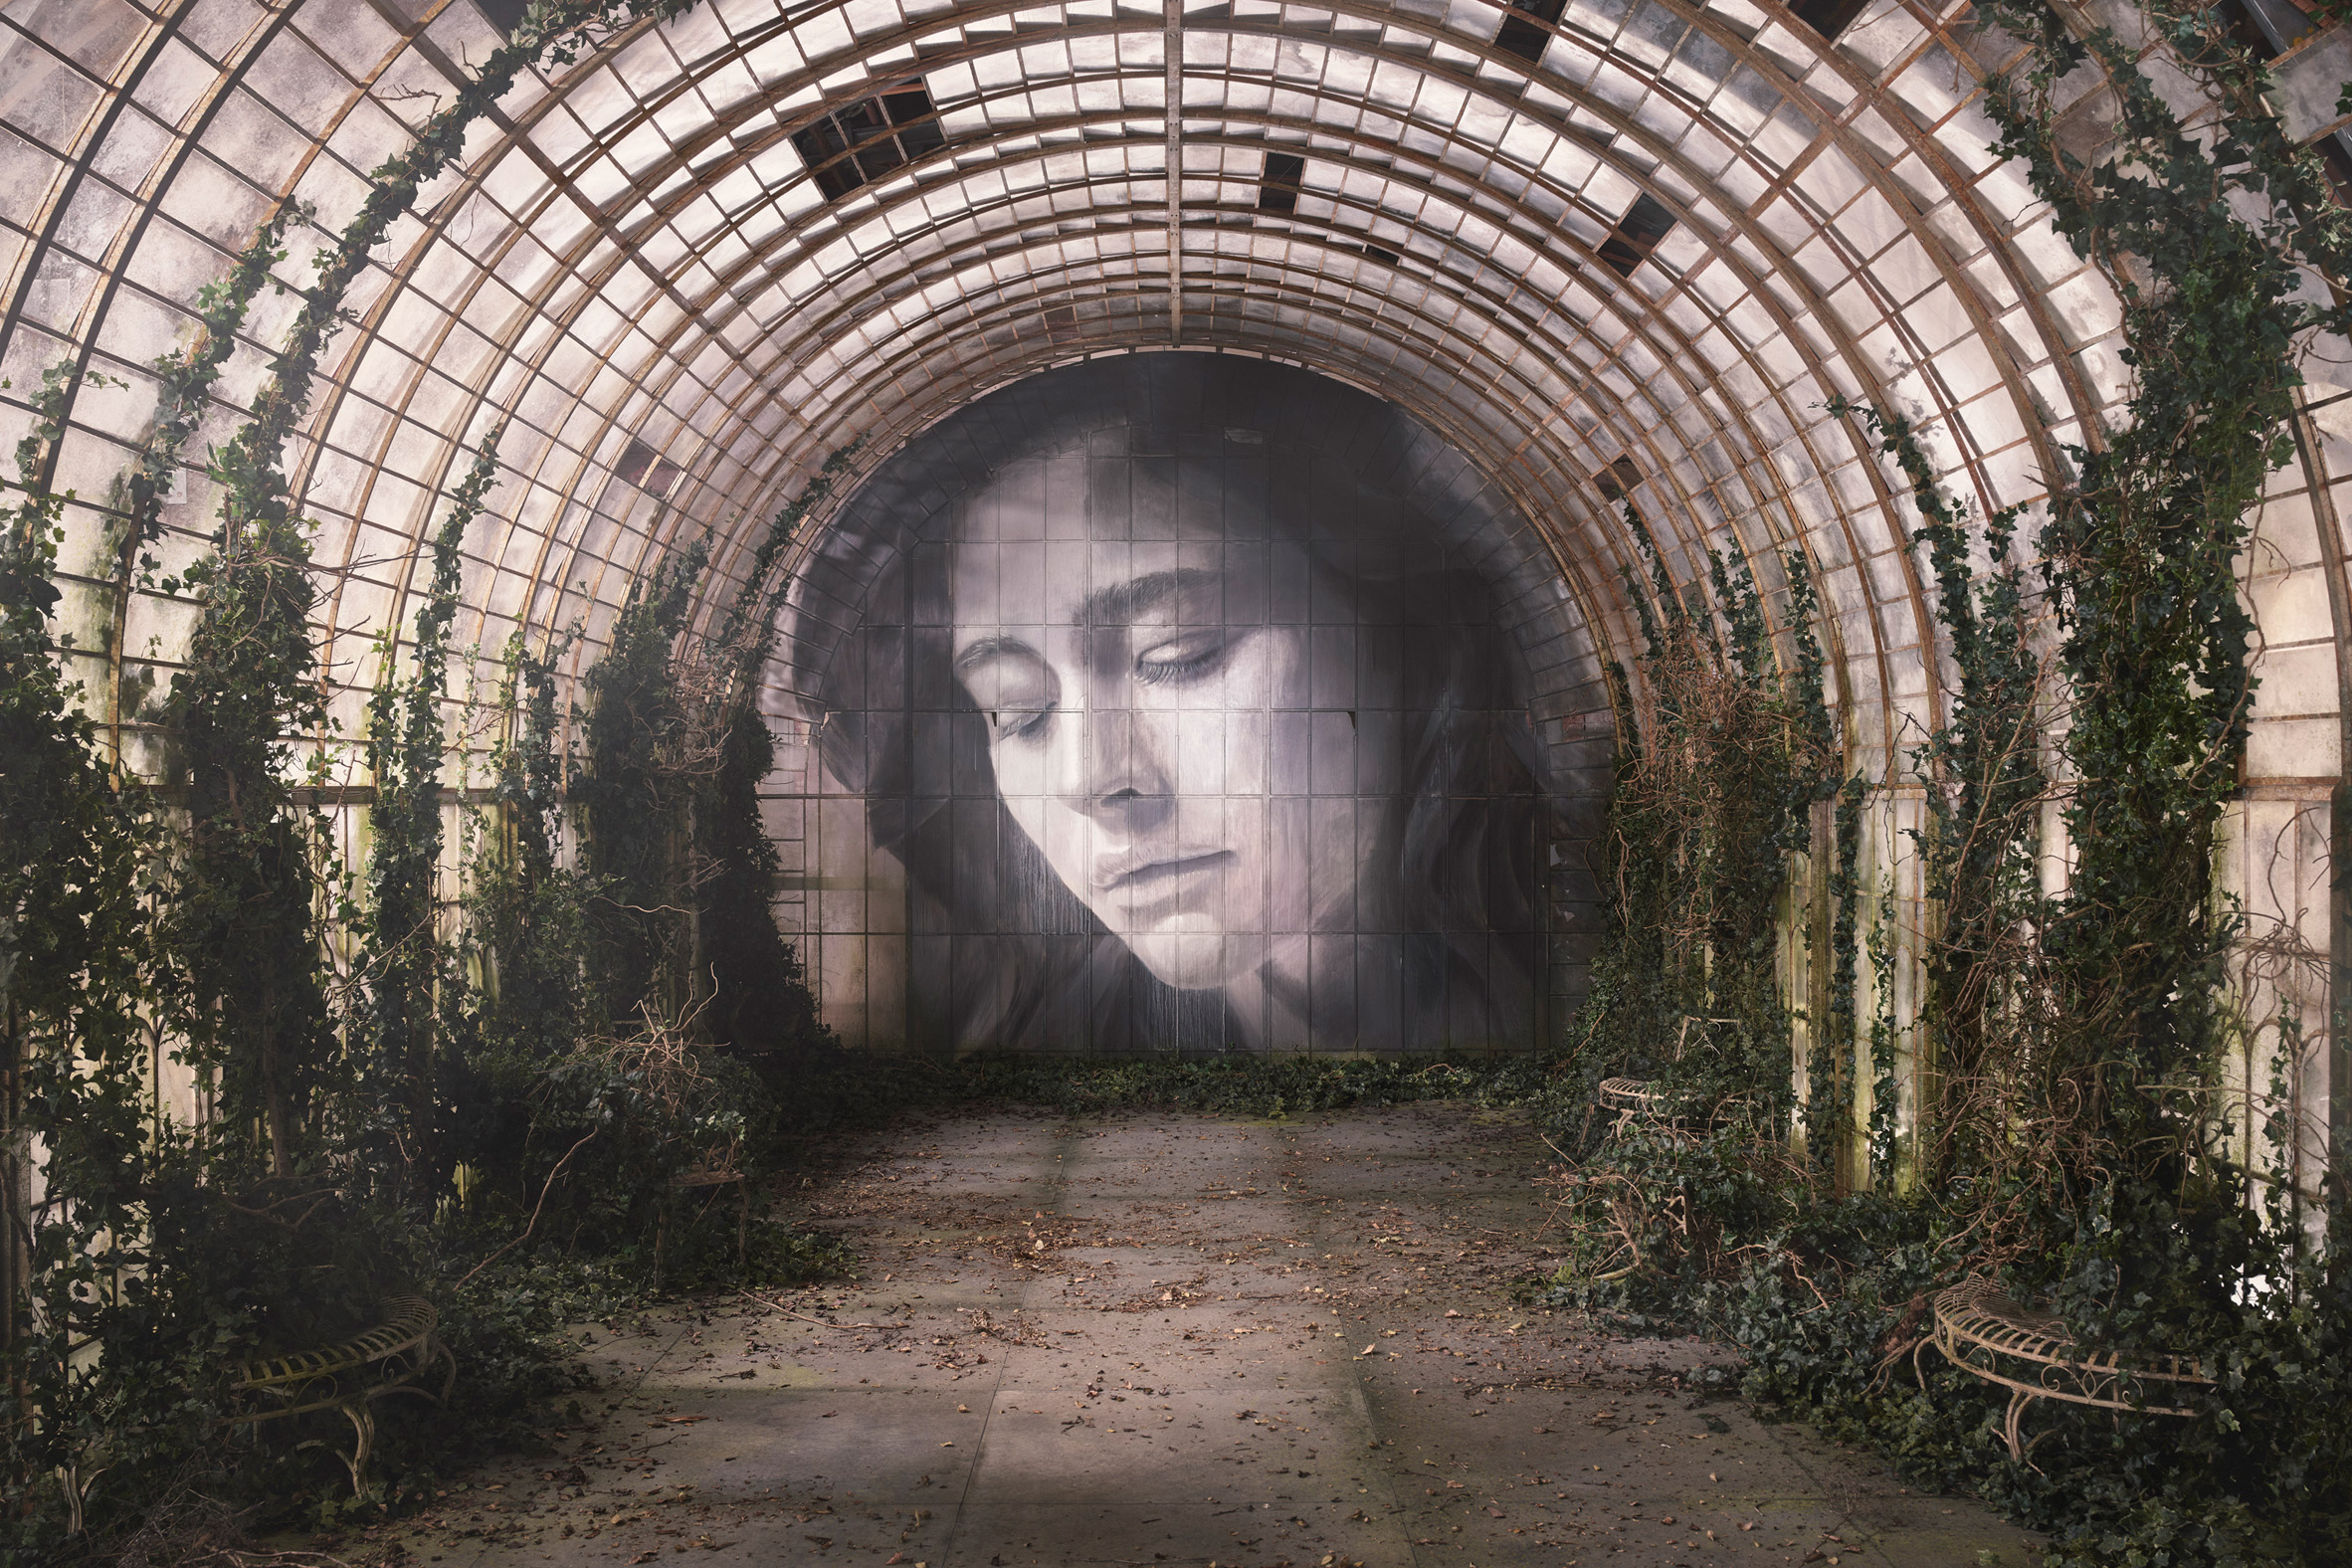 Arched glass house at the Time exhibition by Rone